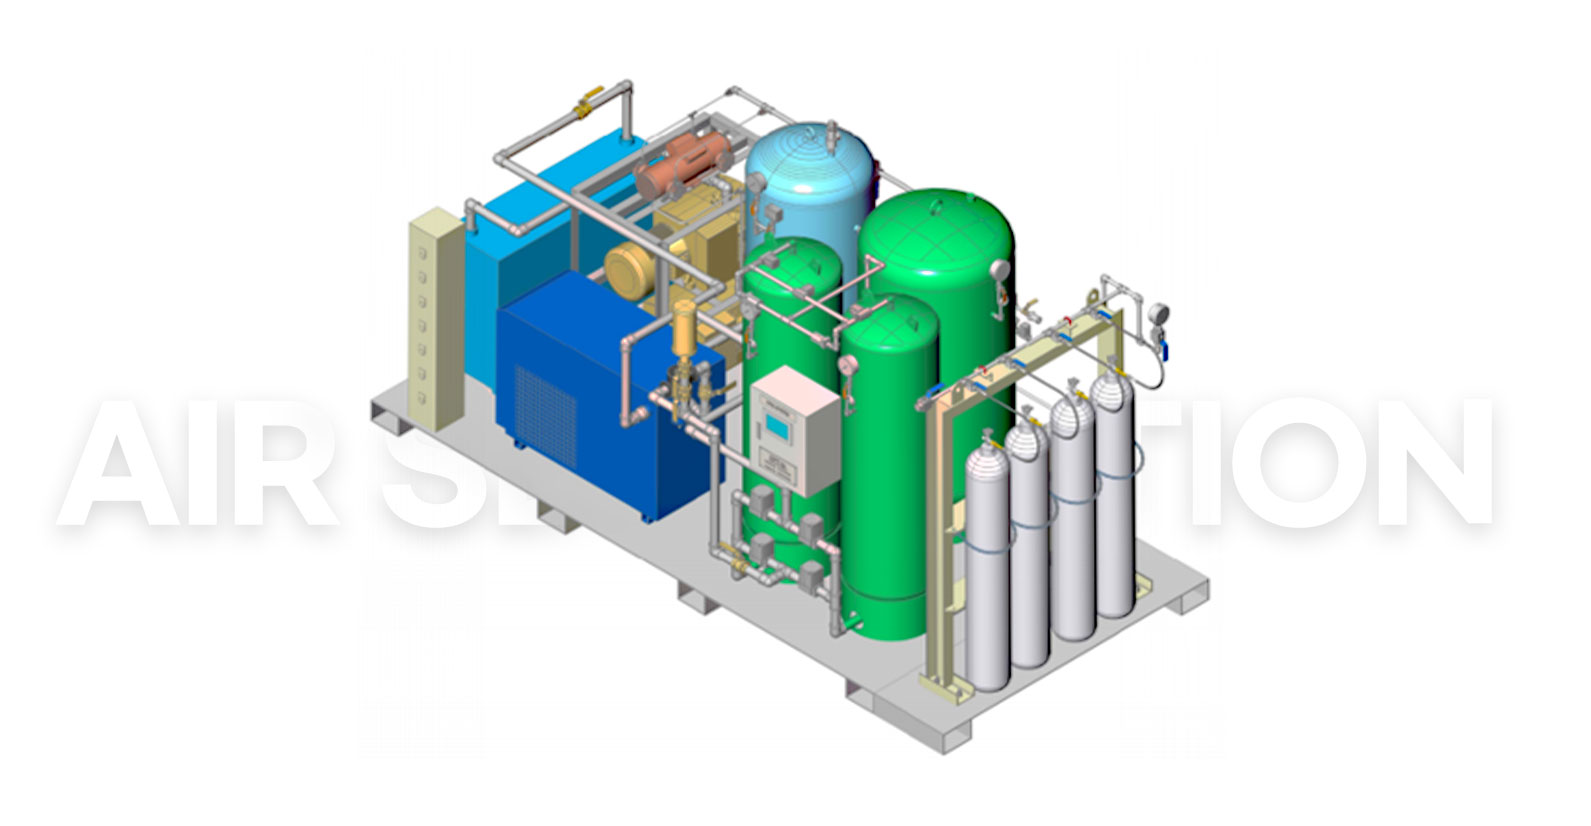 Aspe offers effective O2 vpsa Package solutions through its expertise in gas dehydrator and soec electrolysis.